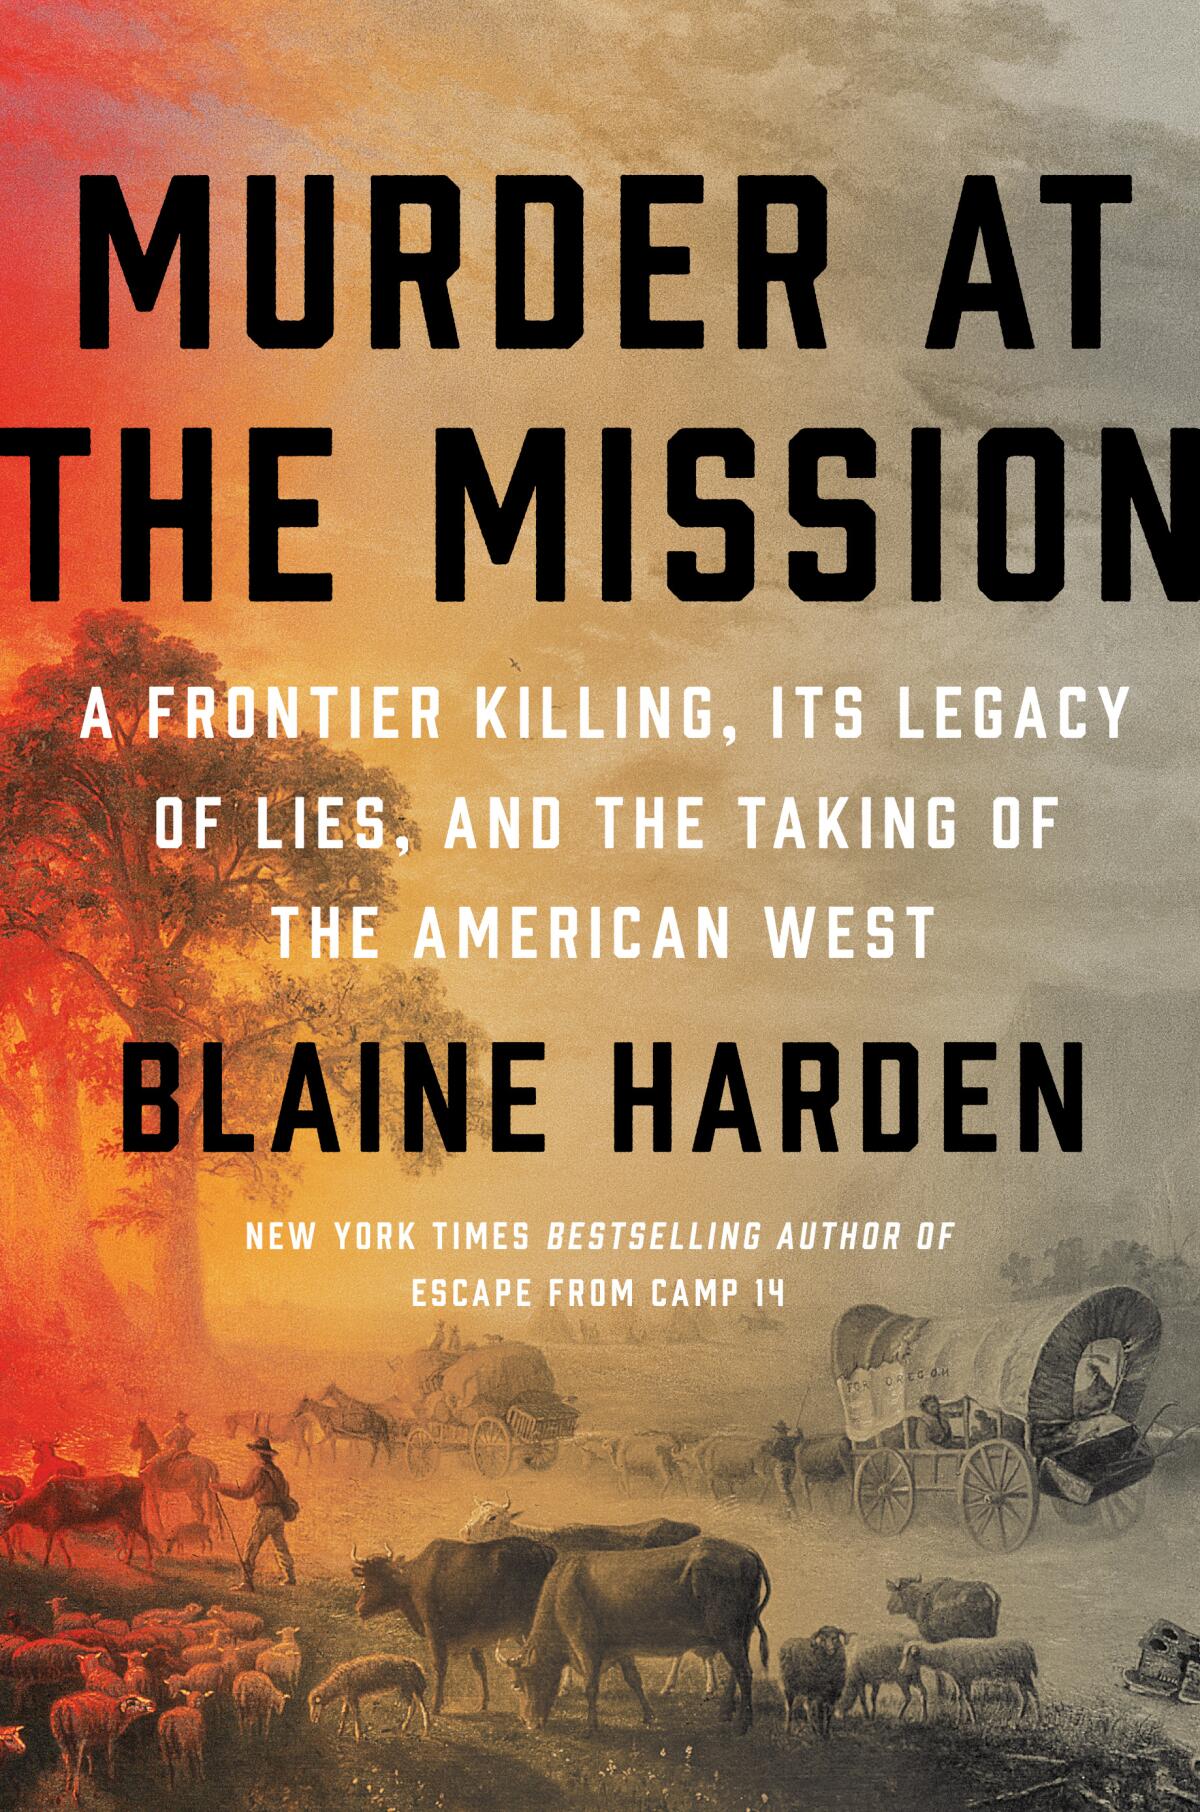 "Murder at the Mission," by Blaine Harden.